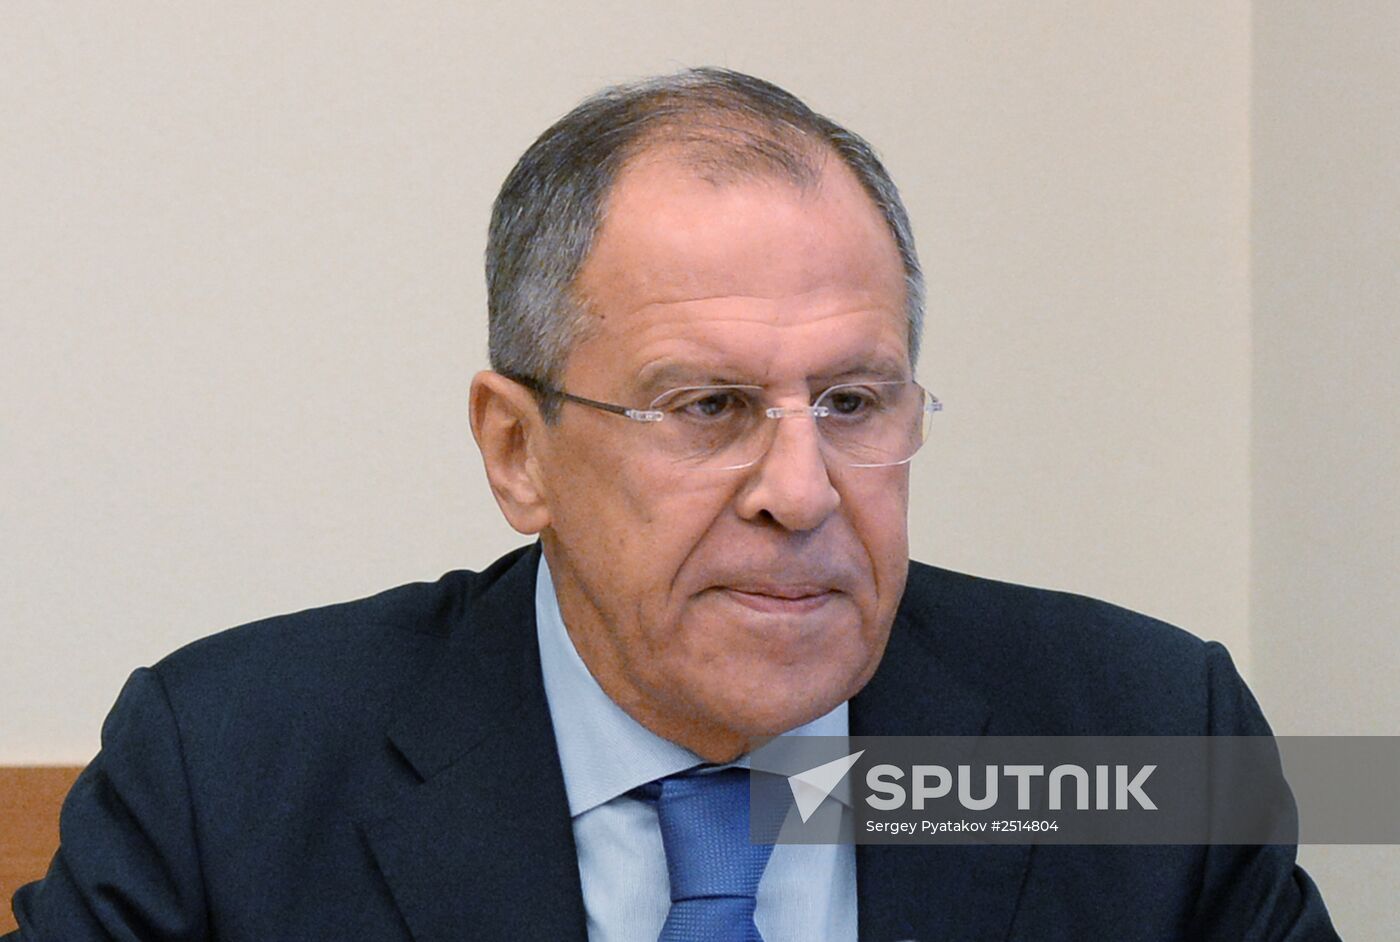 Sergey Lavrov meets with Youth Civic Chamber members